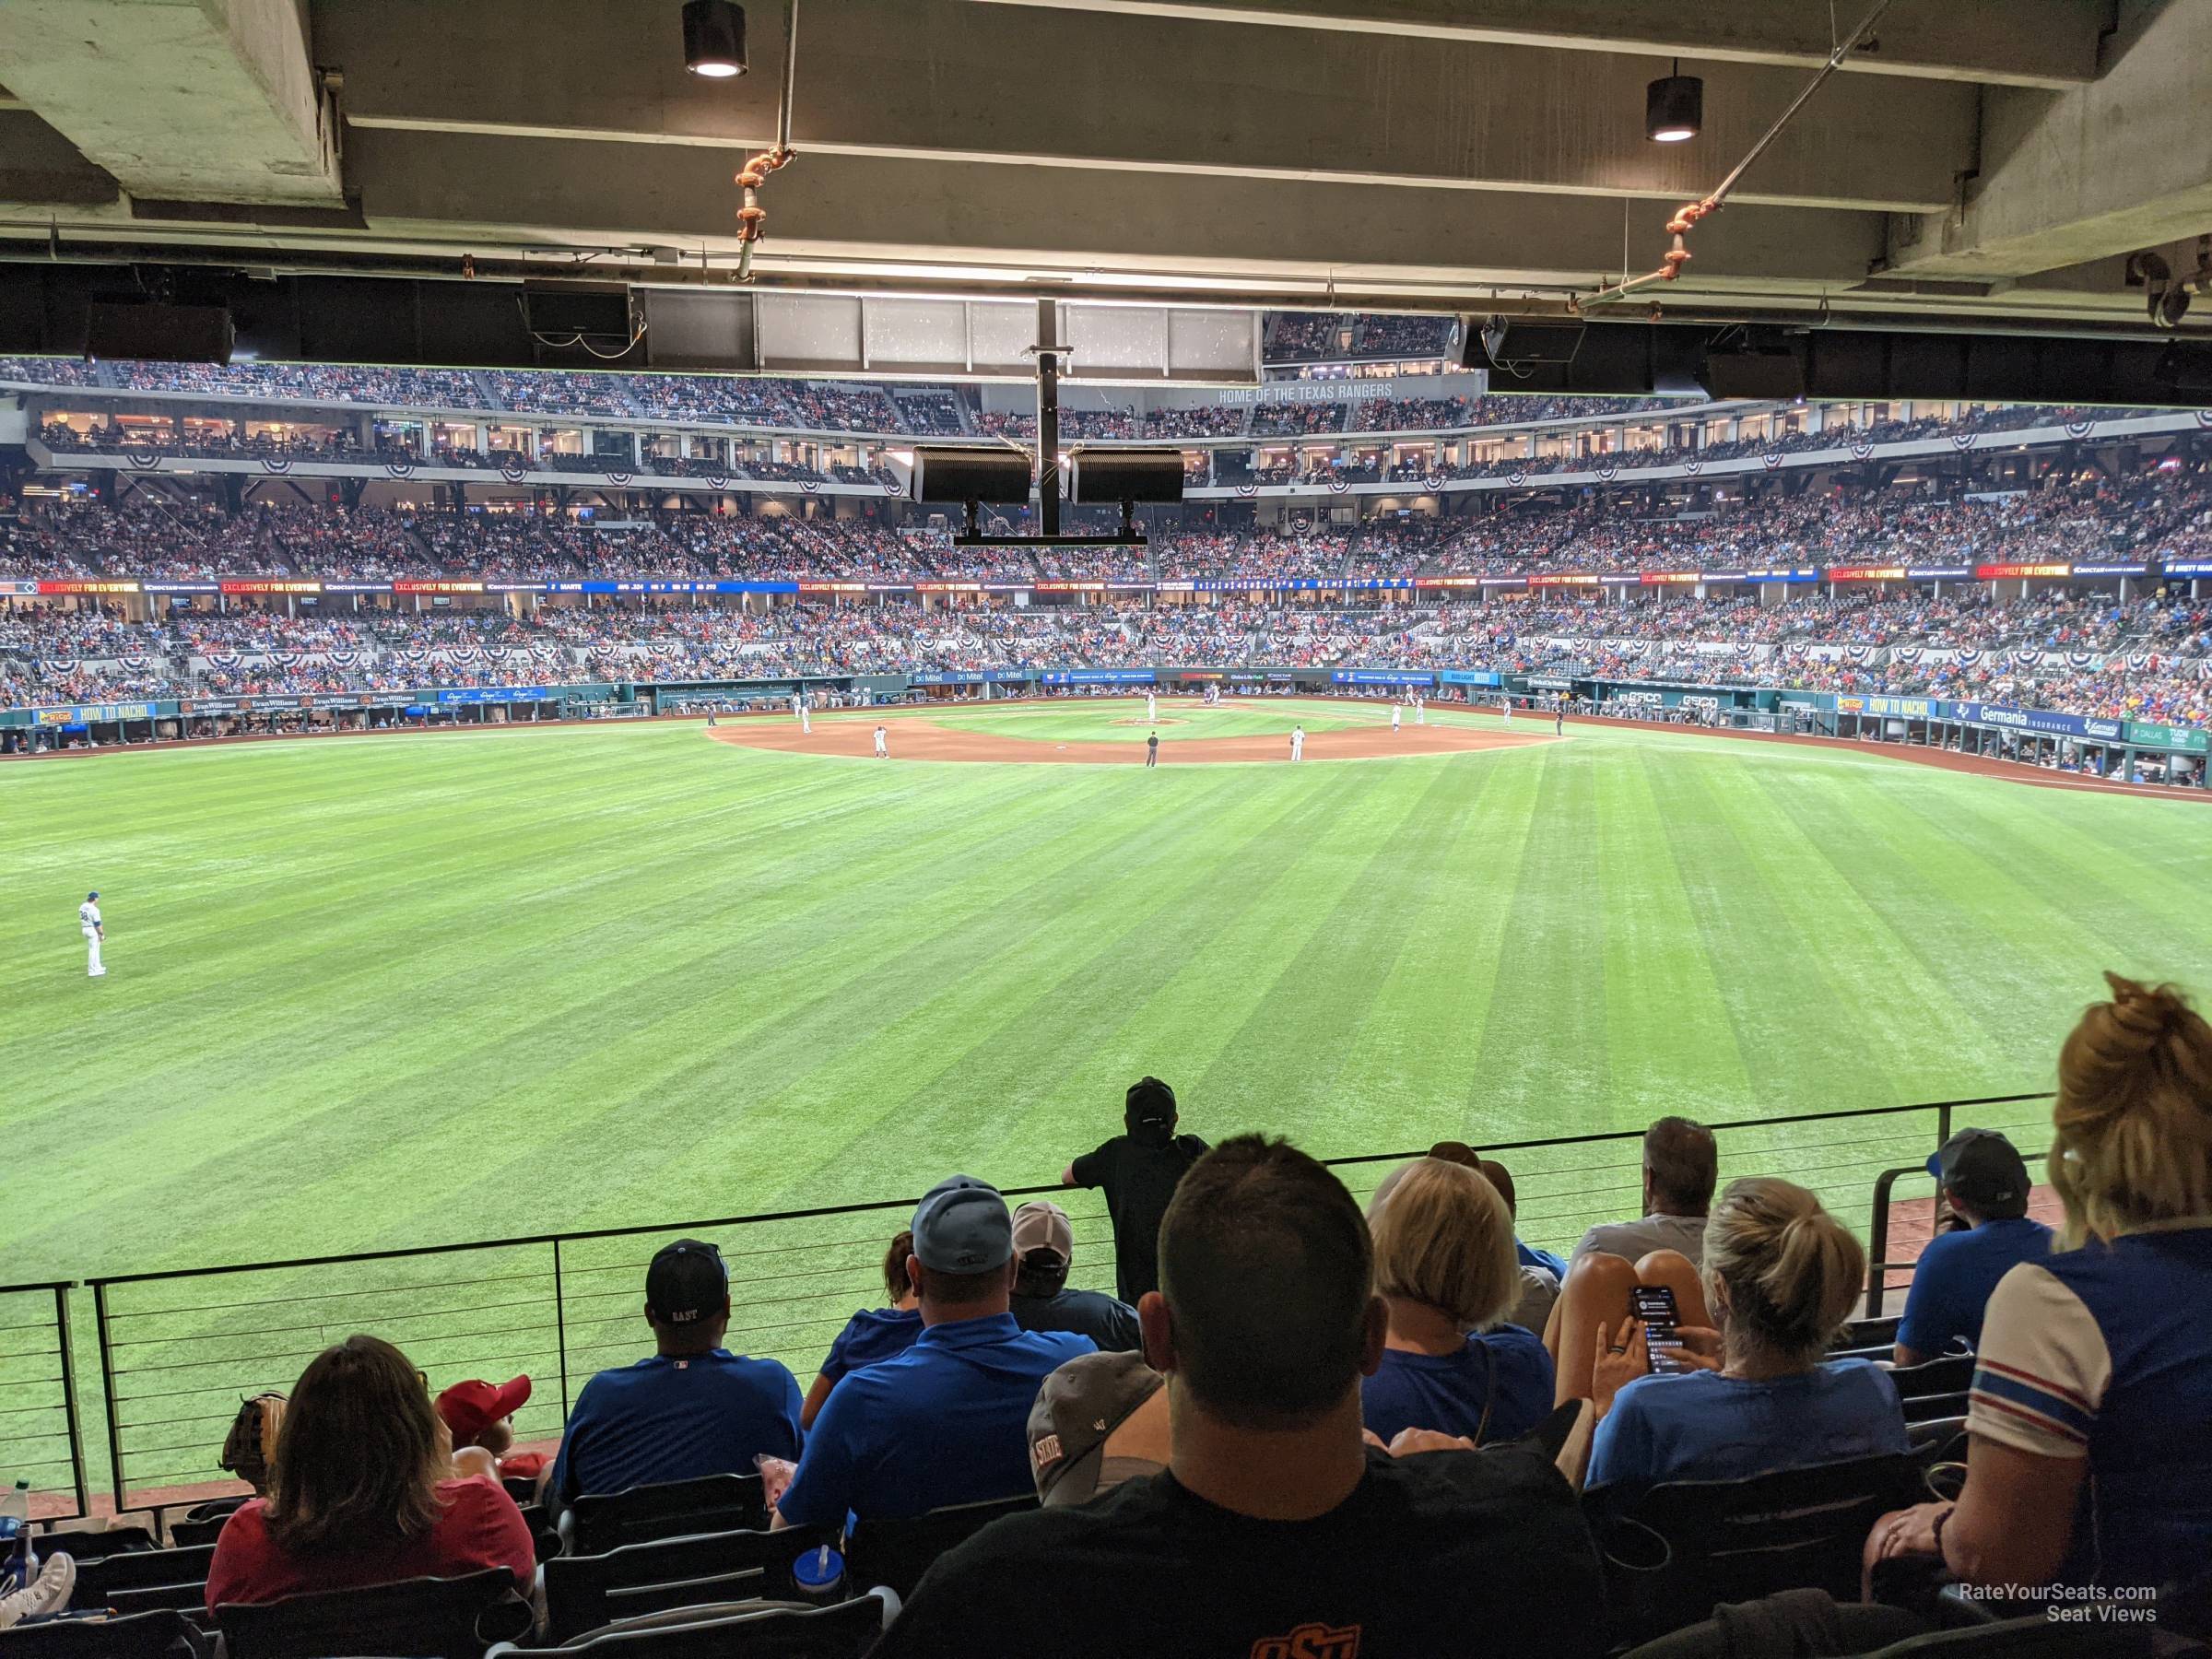 section 28, row 12 seat view  - globe life field